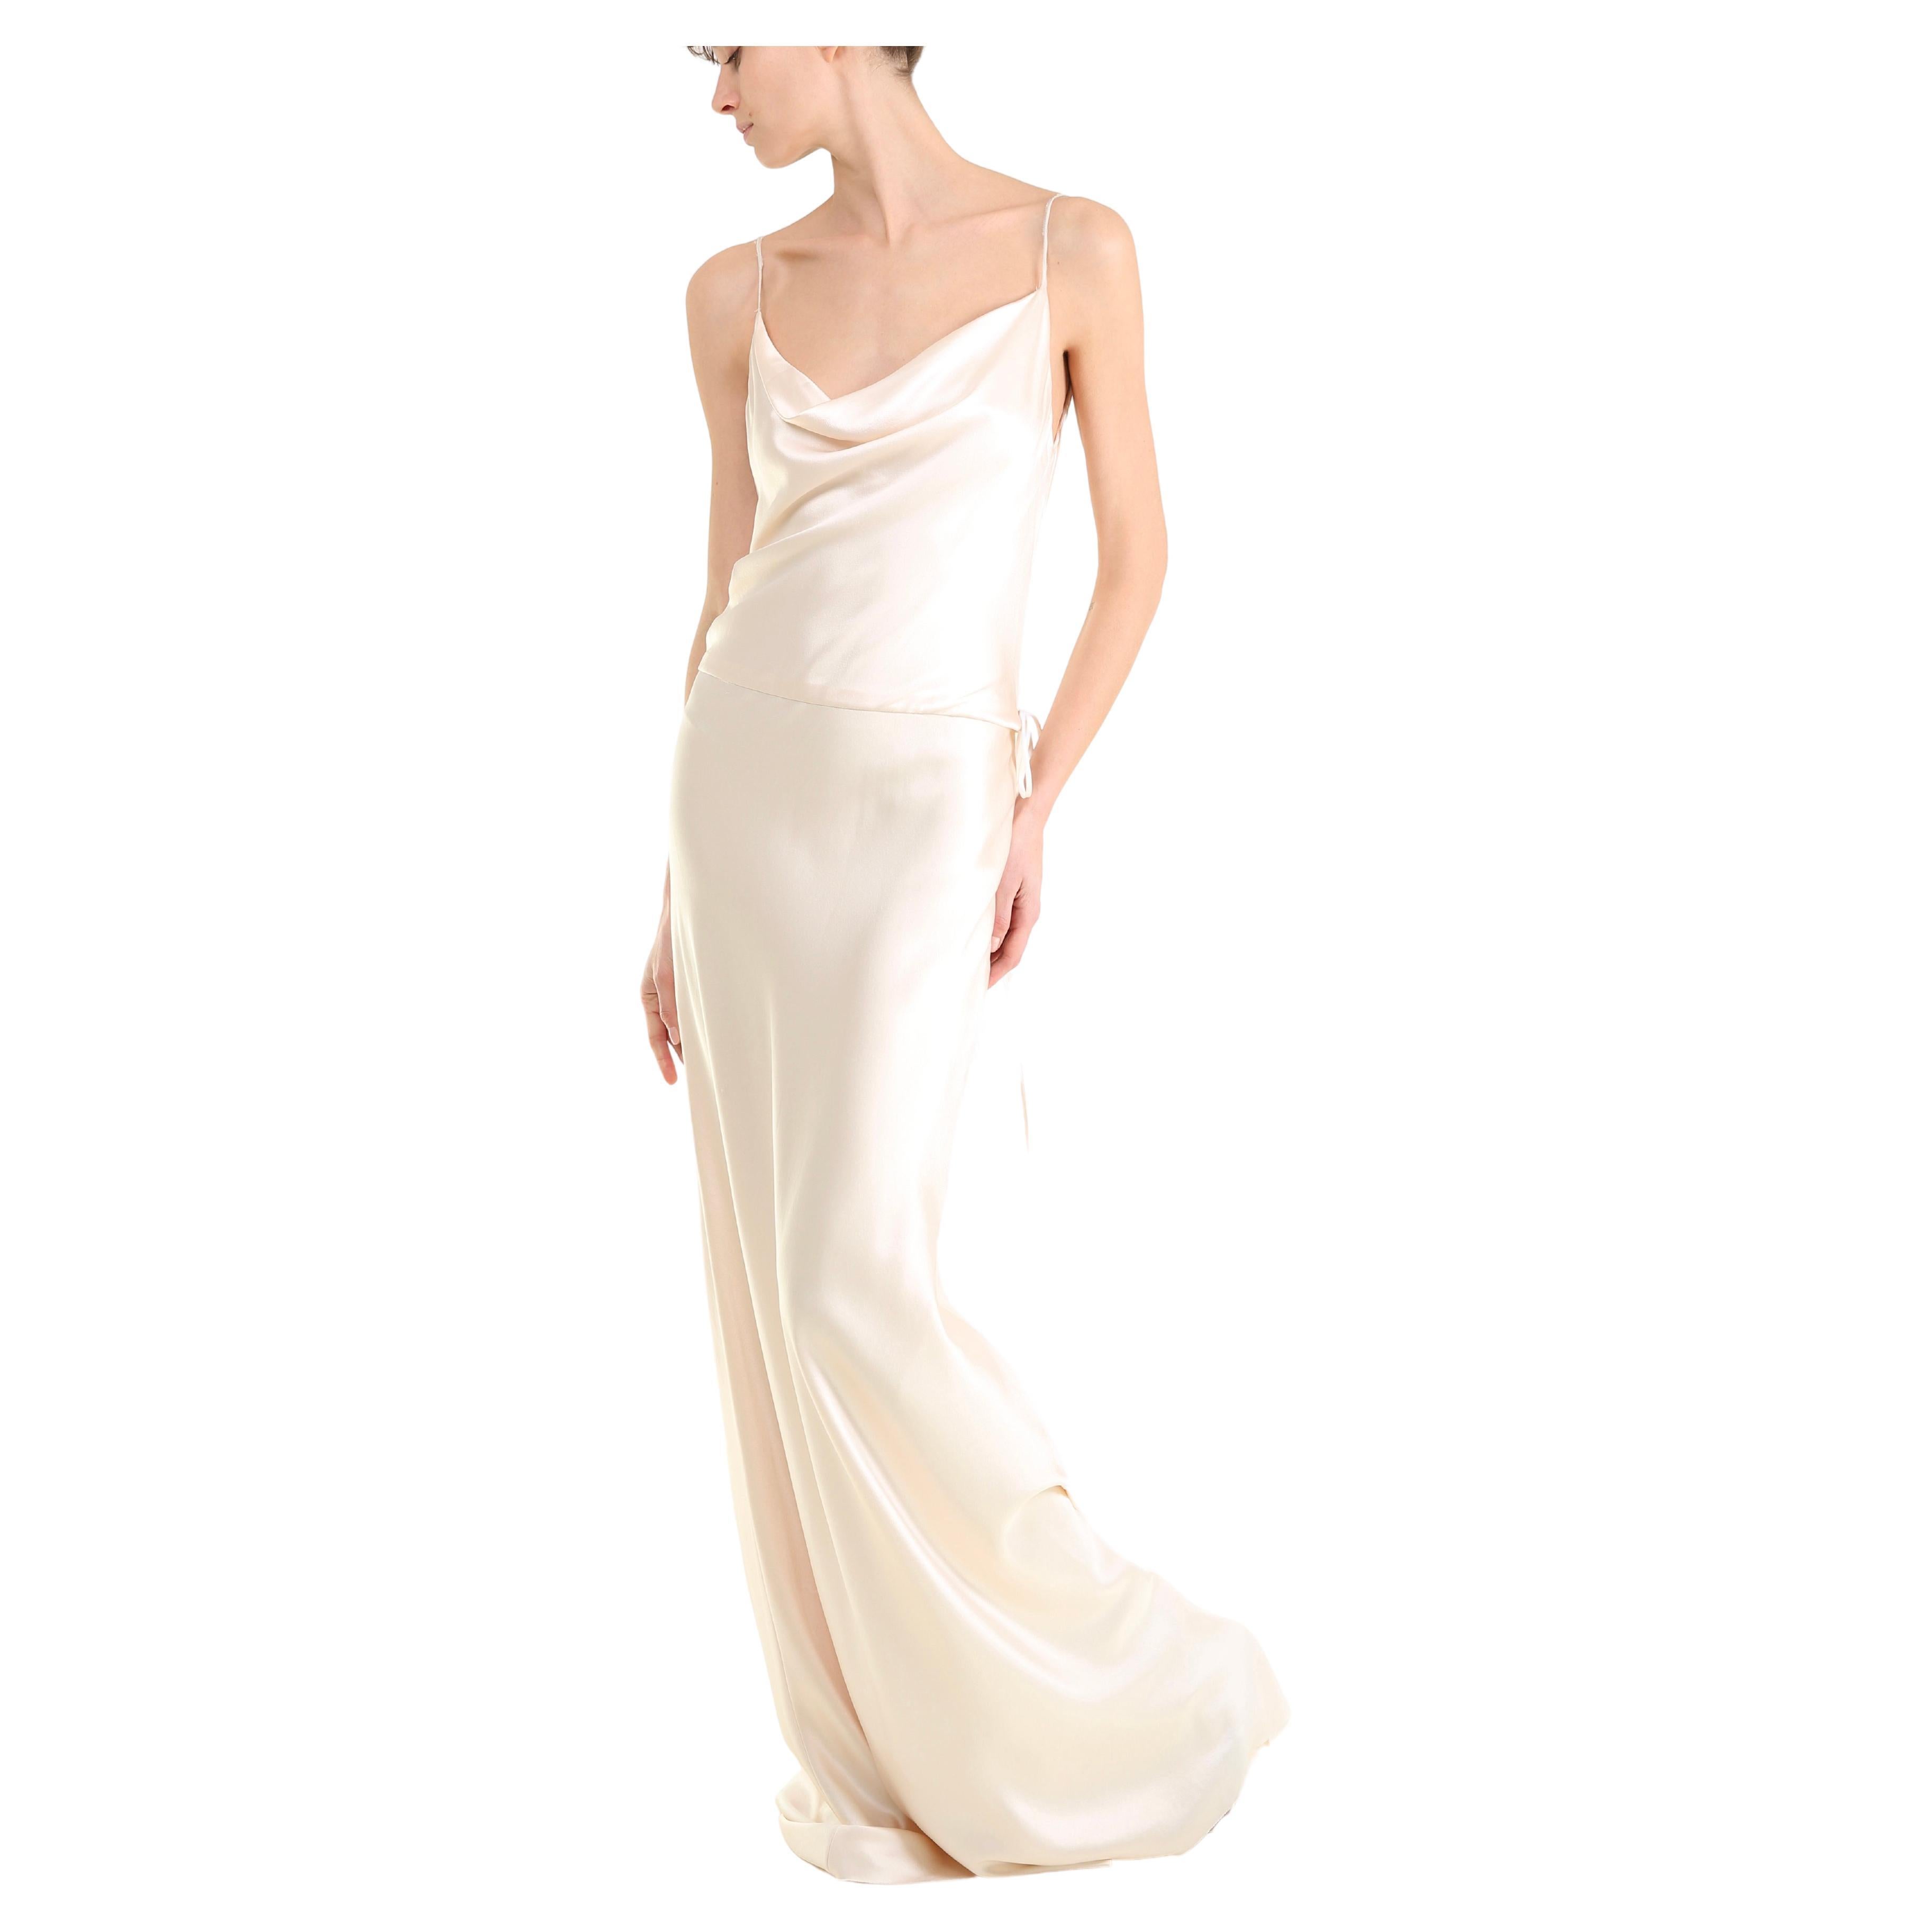 Monique L'huillier ivory silk draped wedding dress gown with low back and train For Sale